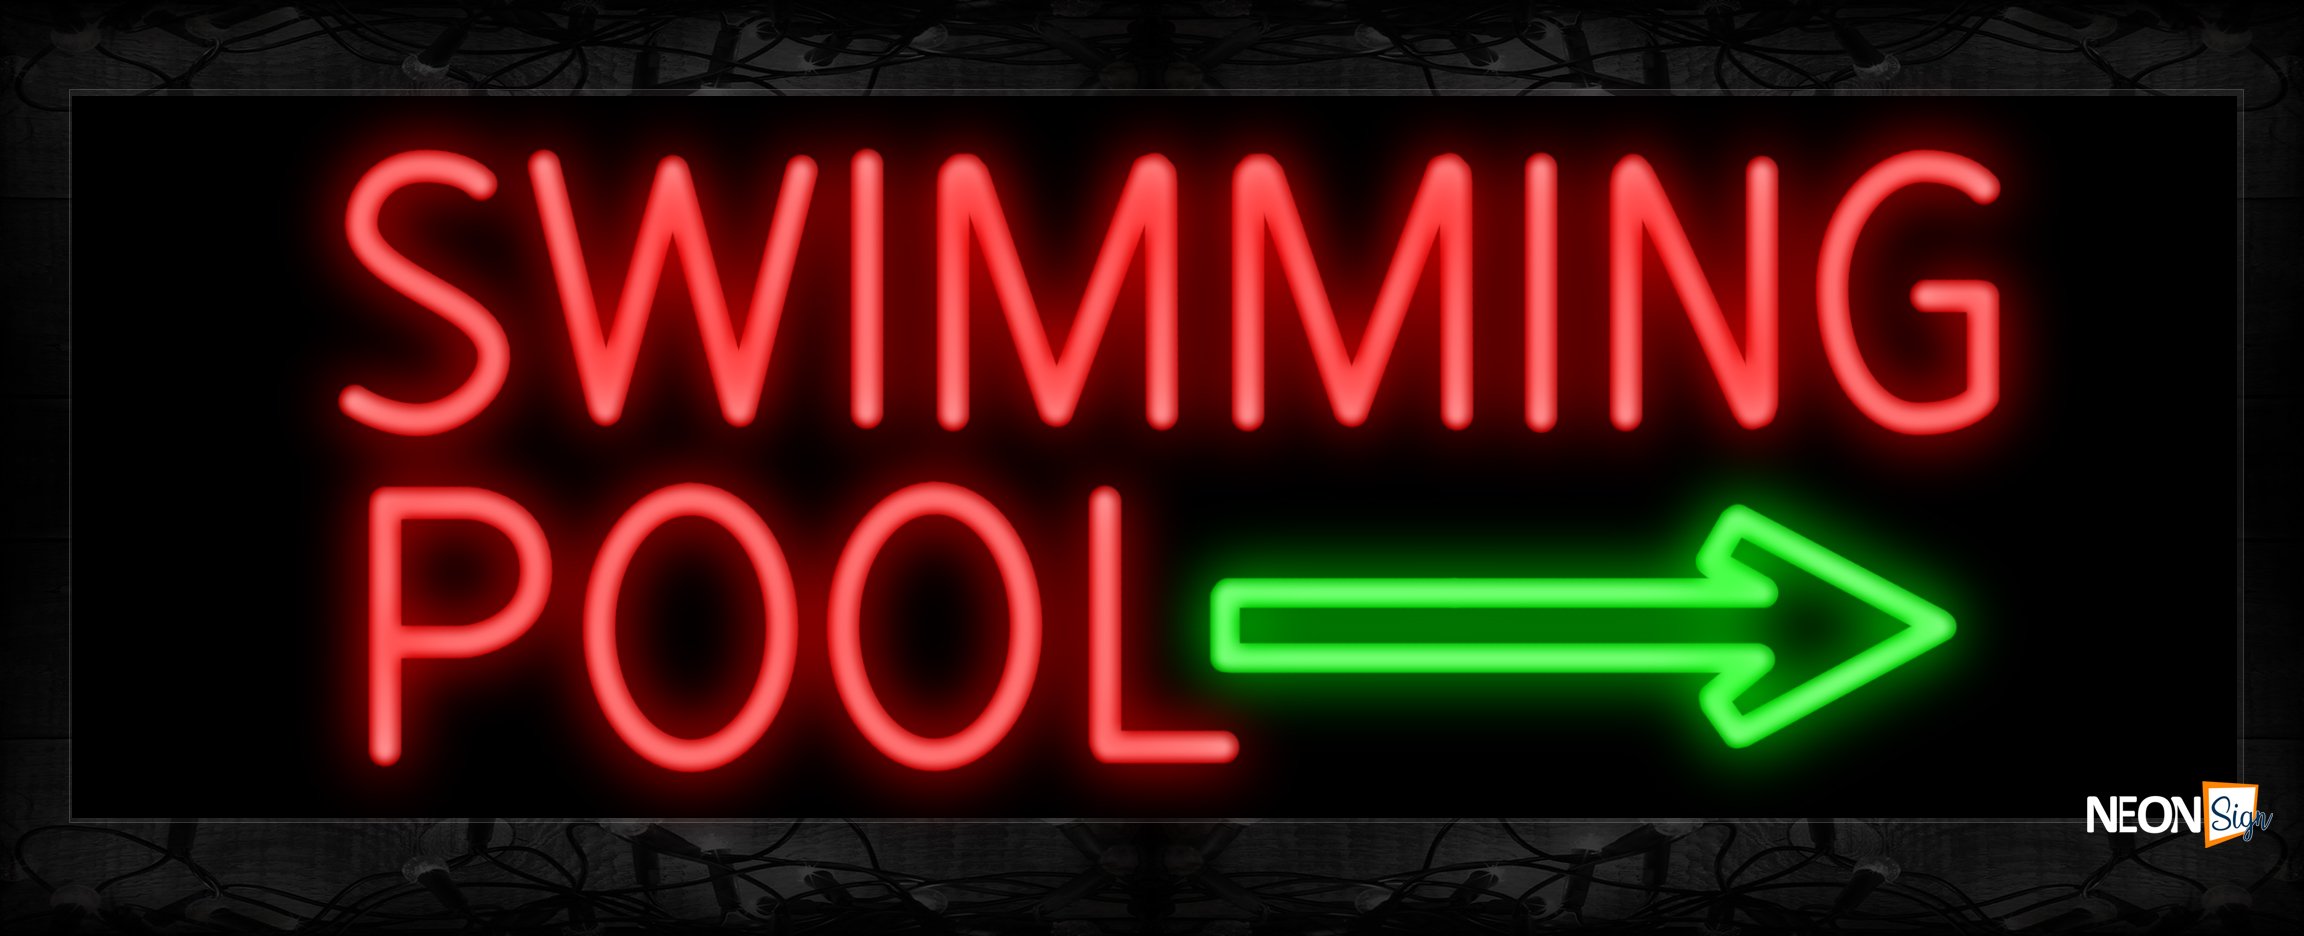 Image of 11482 Swimming Pool in red with green arrow Neon Sign 13x32 Black Backing